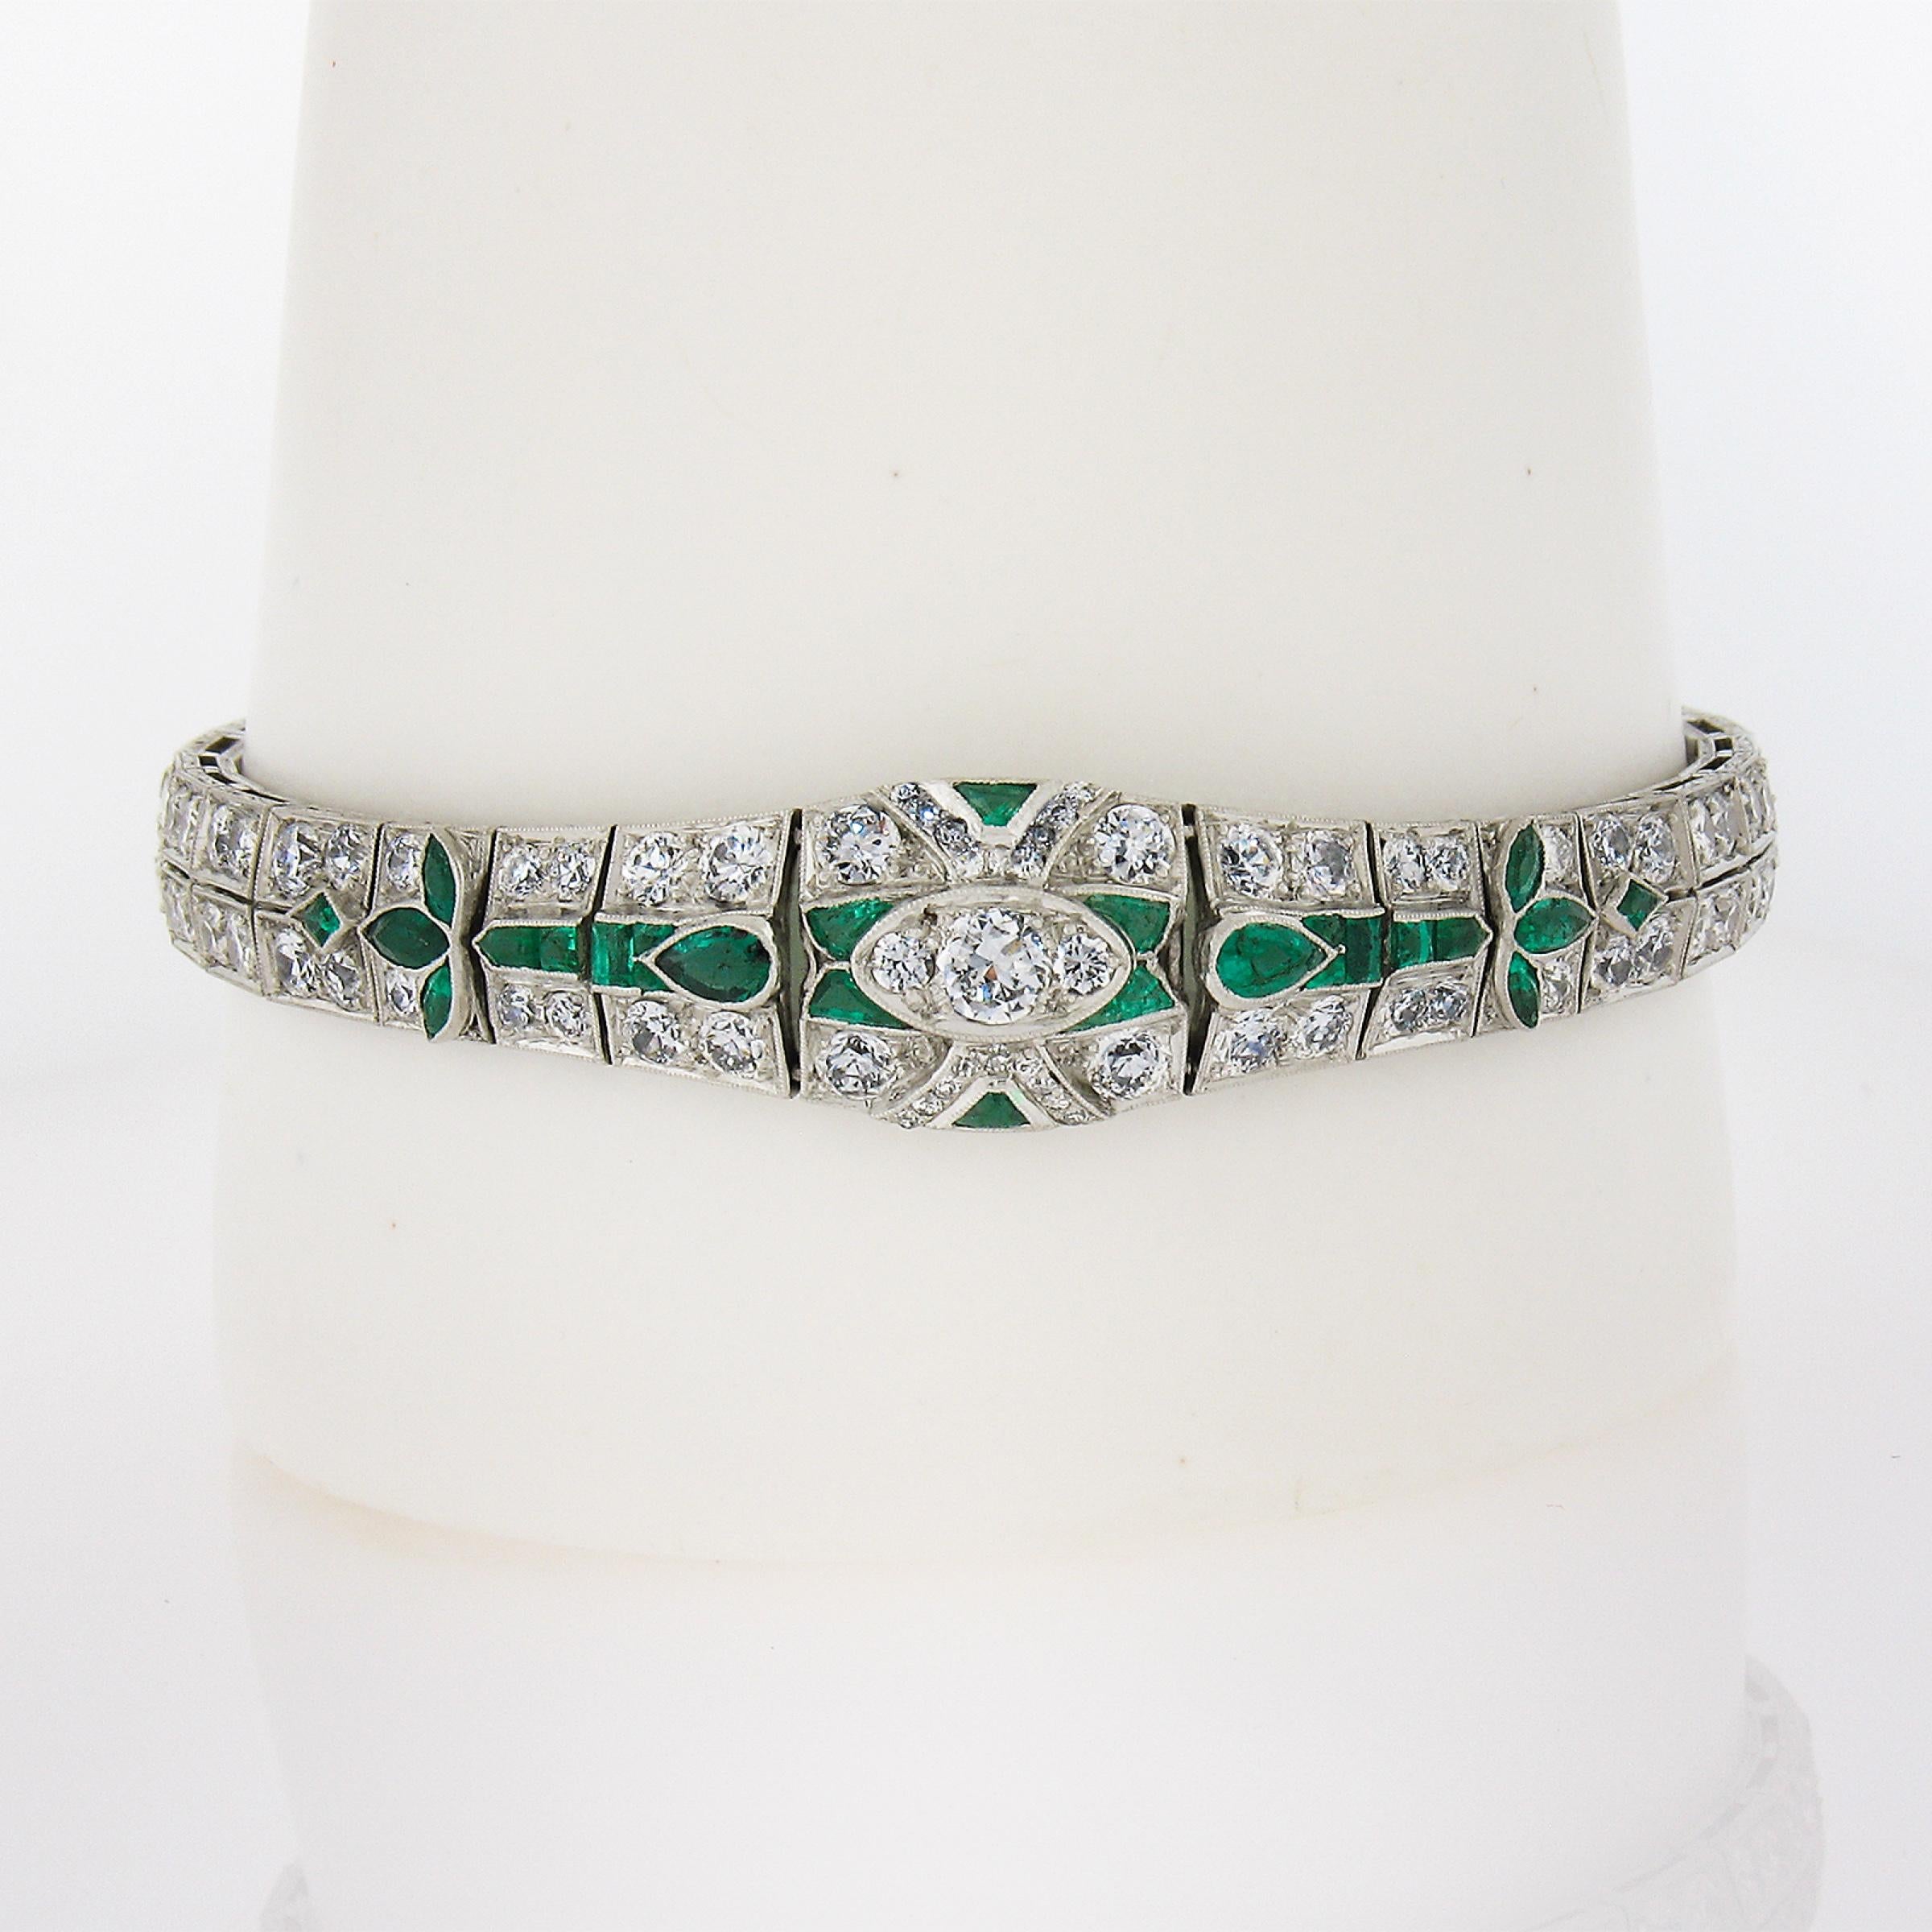 This incredible antique art deco period bracelet features a slightly graduated rectangular links that are elegantly encrusted with pave set old European diamonds throughout. These old cut diamonds are full of life and character with eye-catching